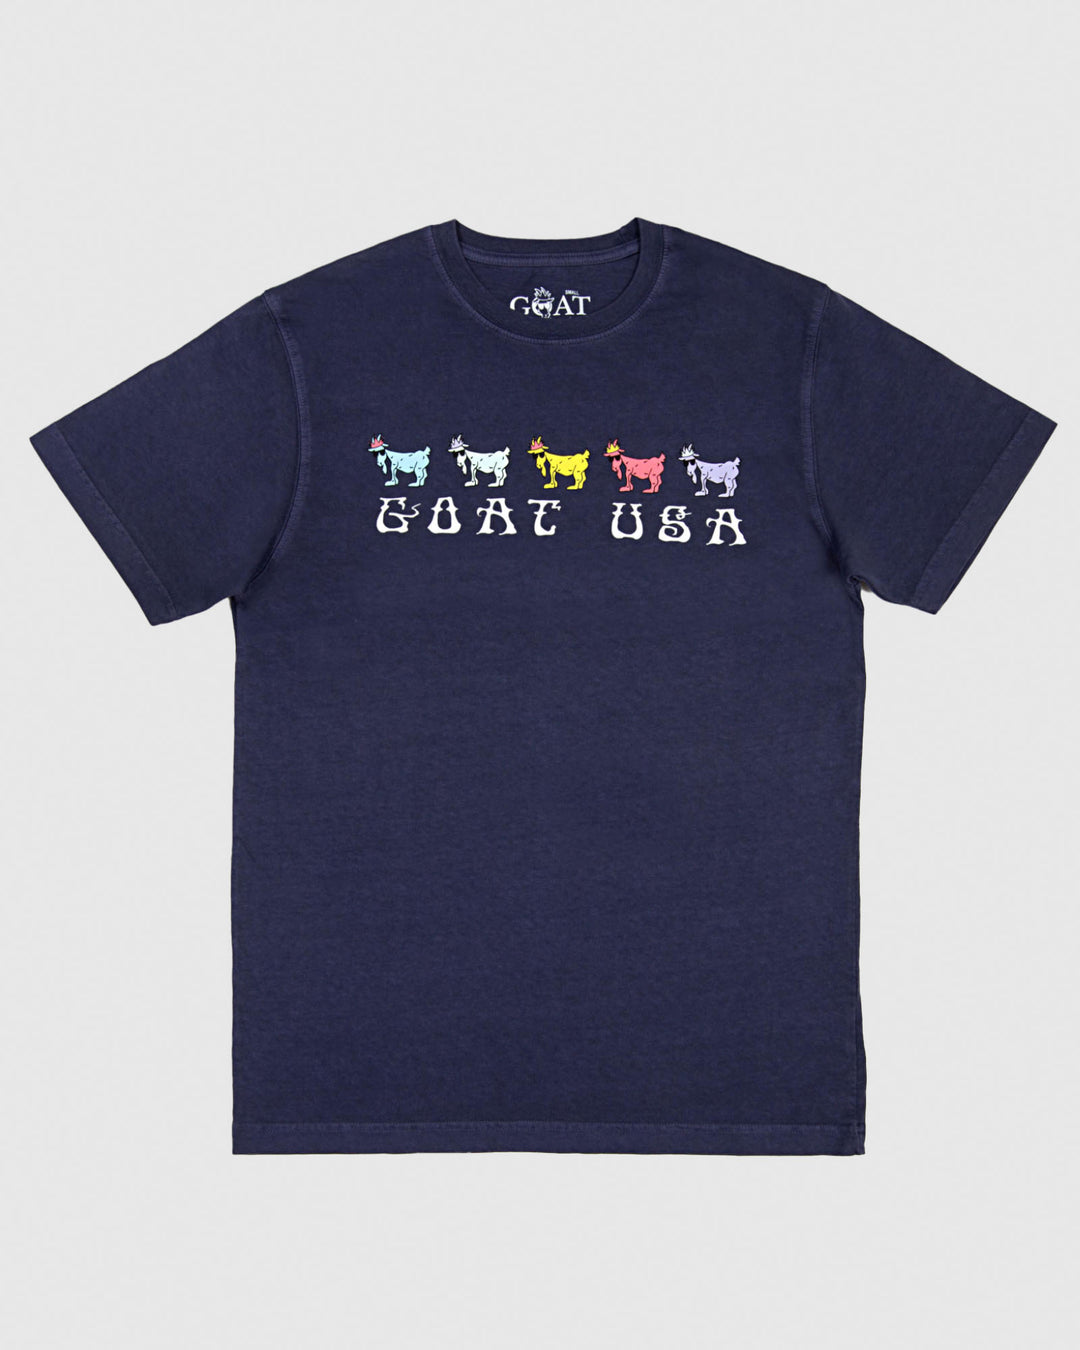 Frontside of navy t-shirt with different colored goats